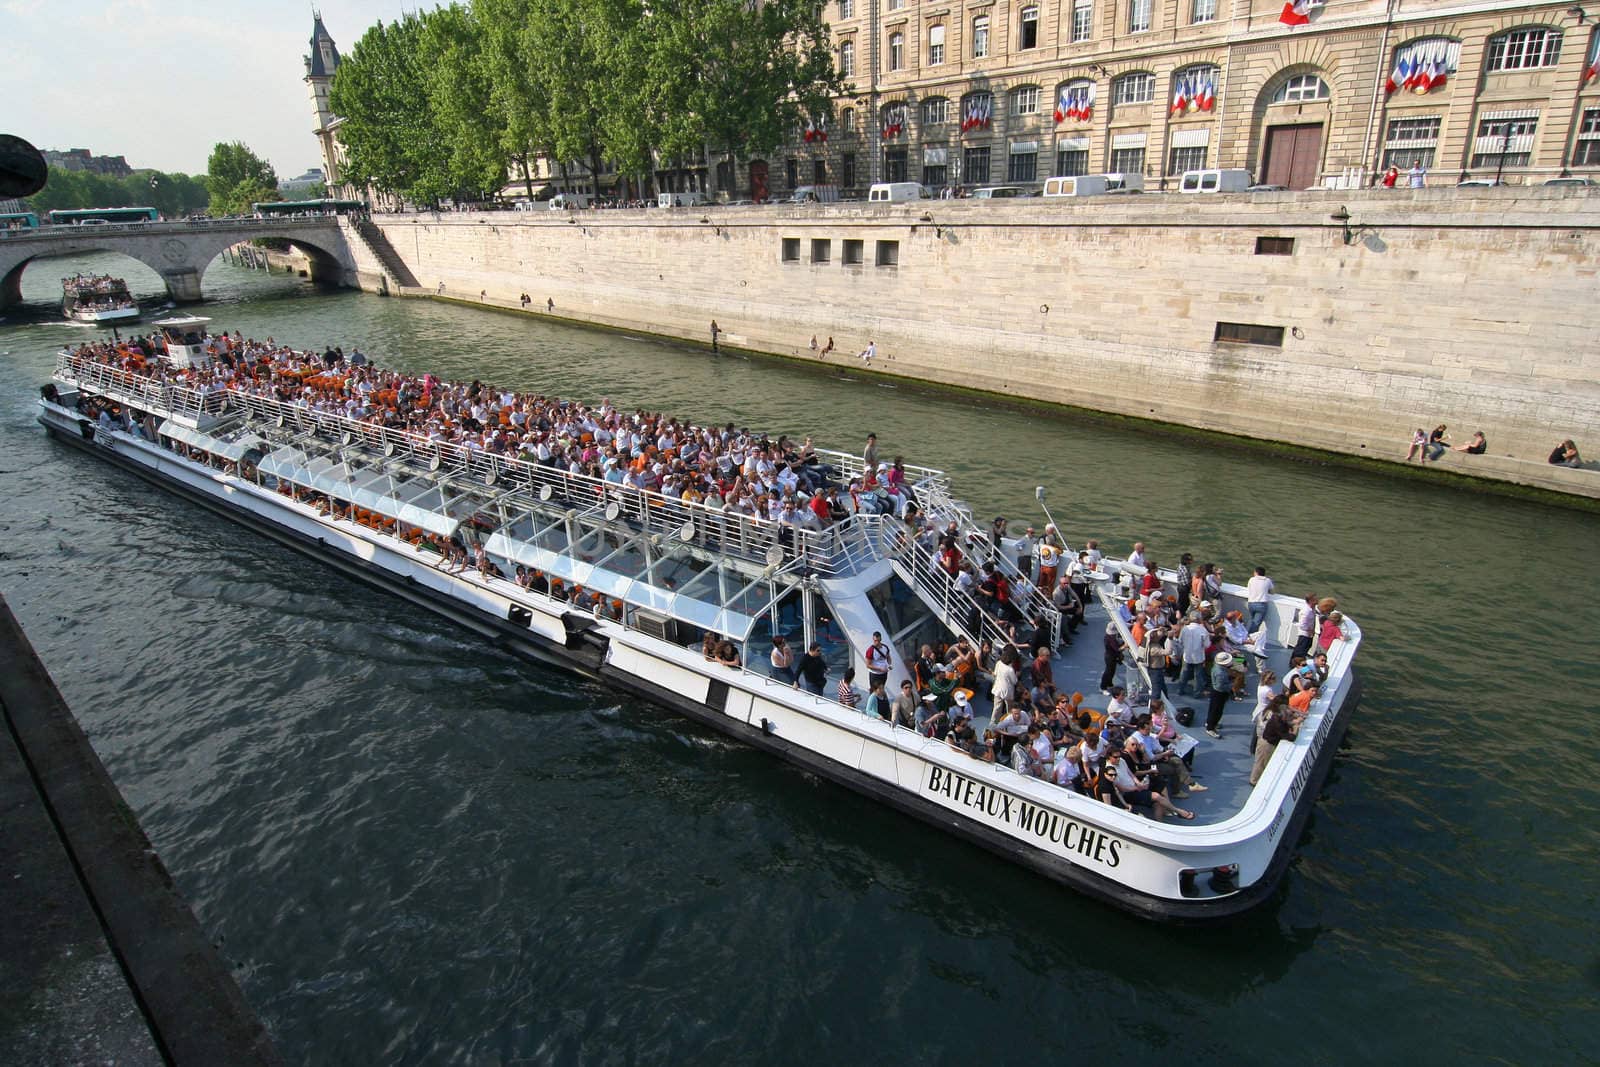 Giant canal boat with tourists in the Seine in Paris, France